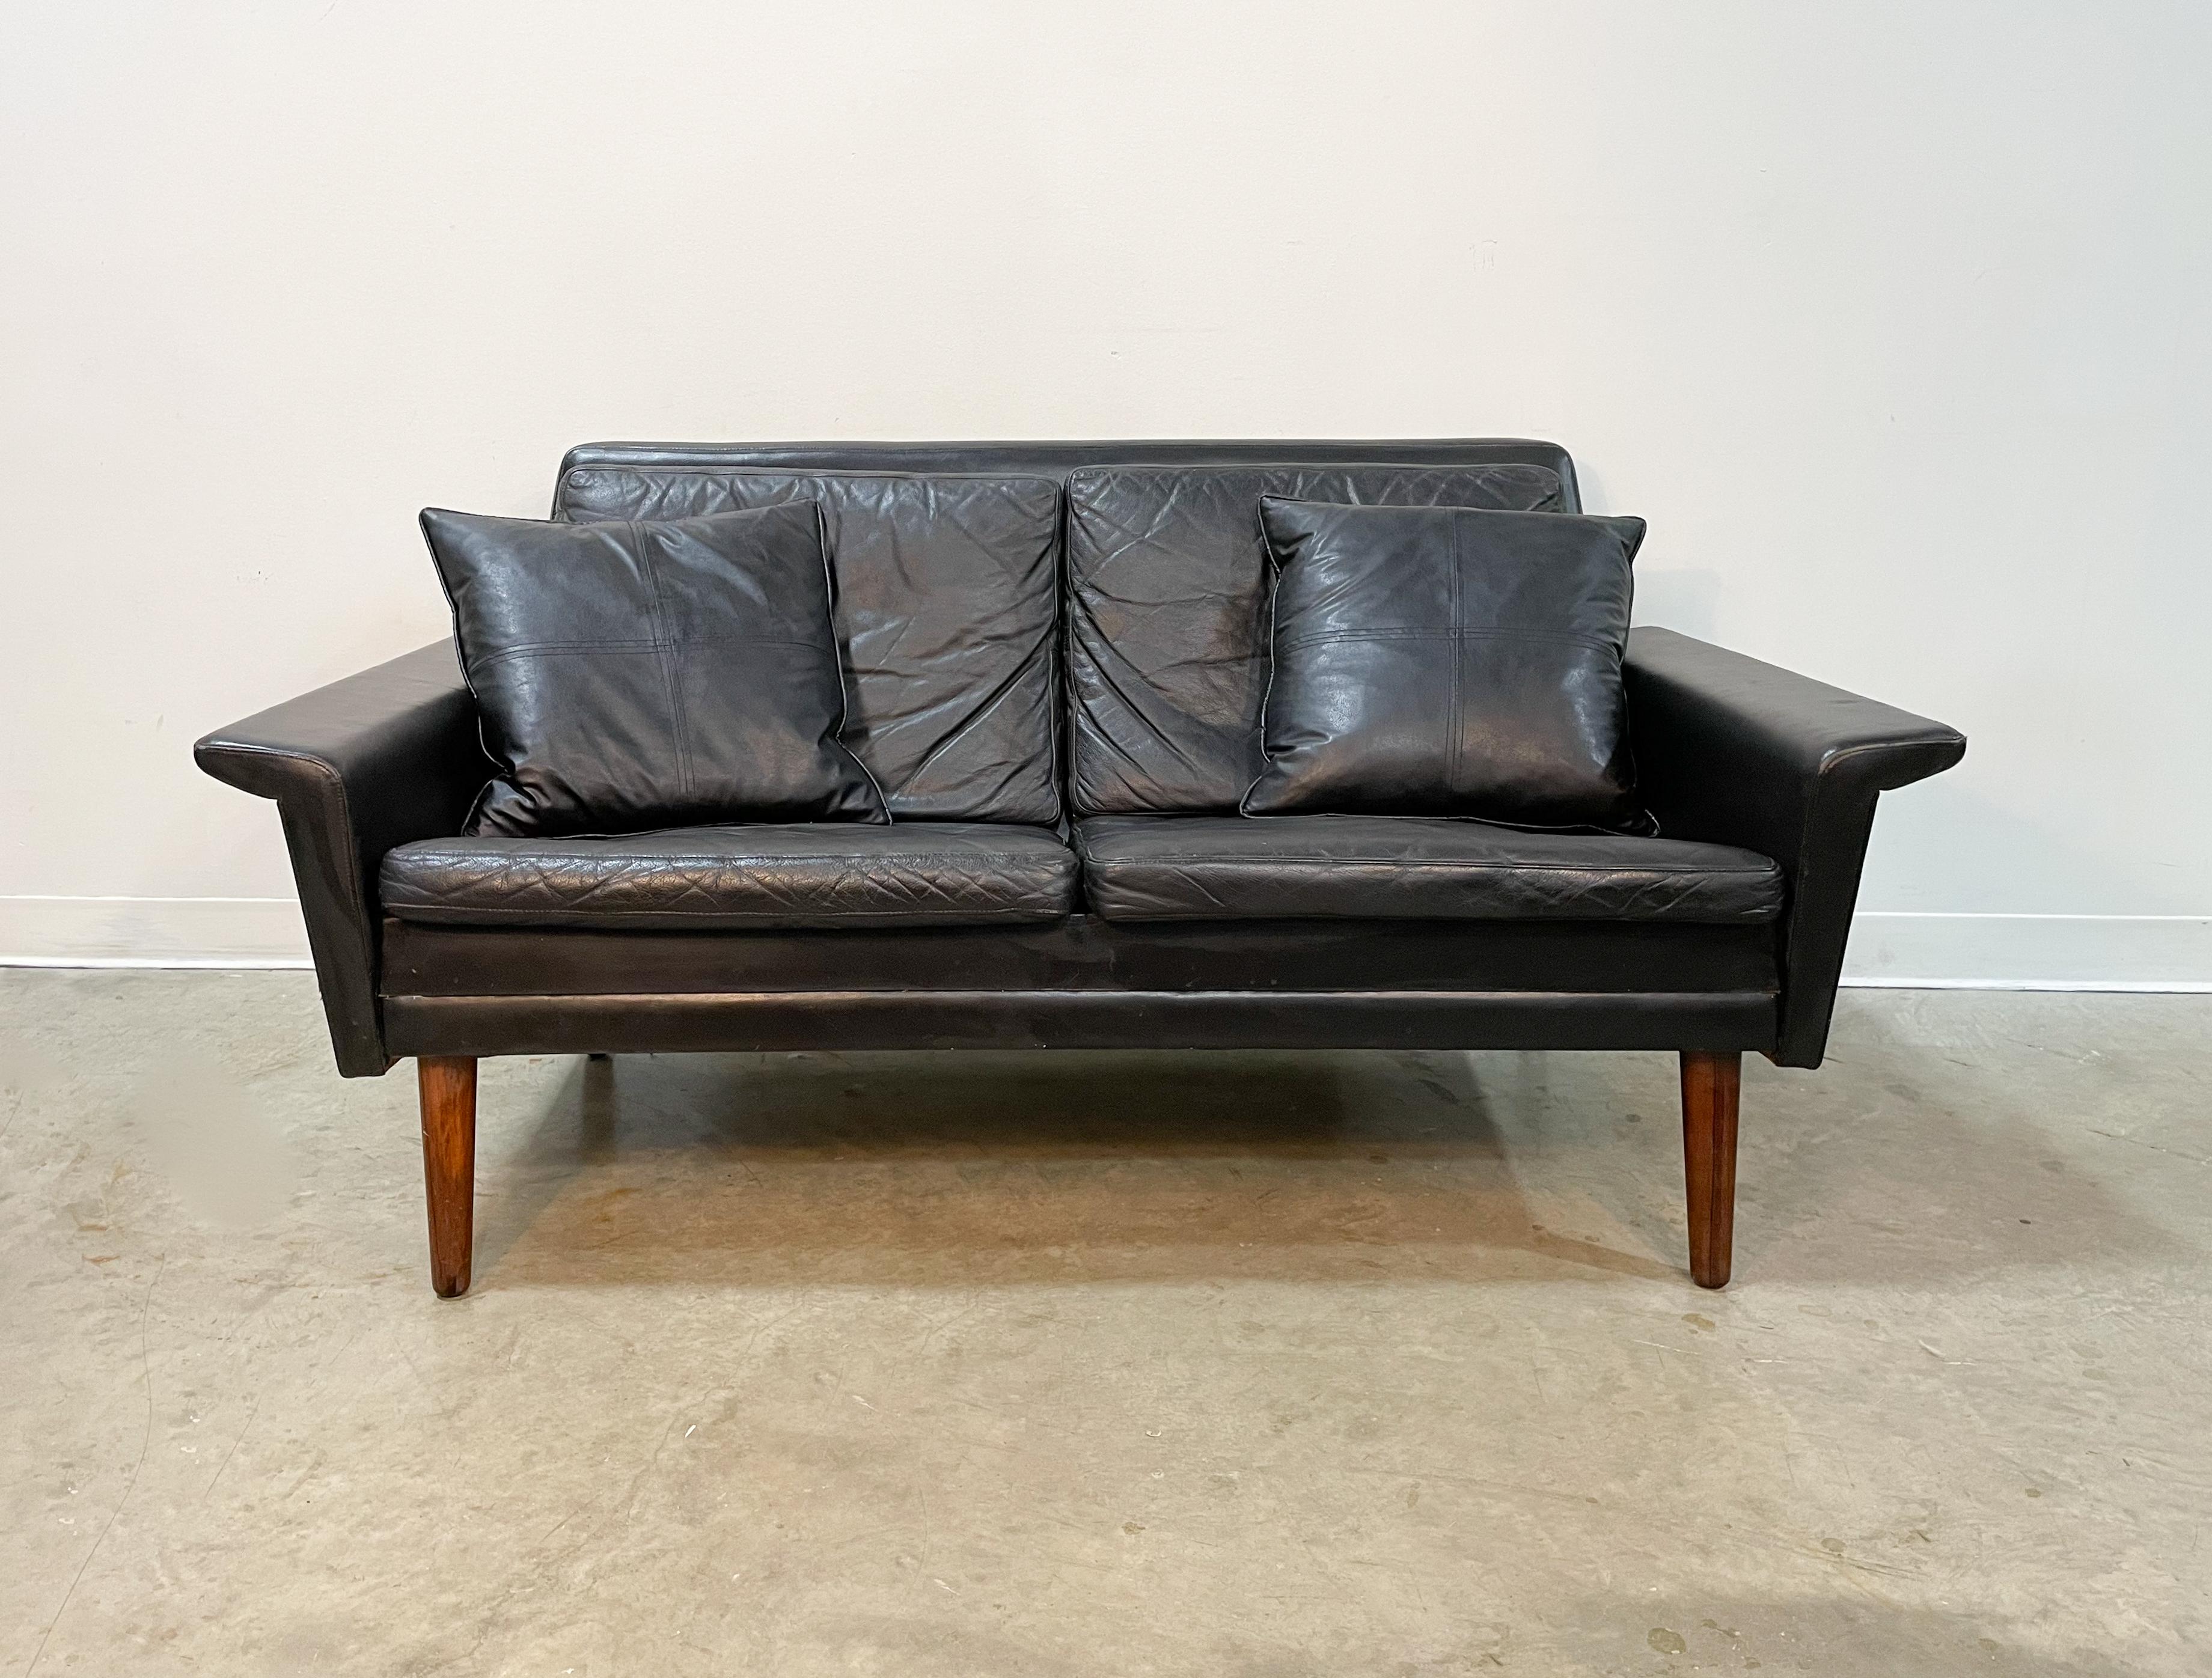 Sleek black leather Danish loveseat on Brazilian Rosewood legs from the 1960s. Very comfortable piece with a generous seat for 2-3 people. Solid oak construction with all original leather. Comfort is enhanced with two matching throw cushions